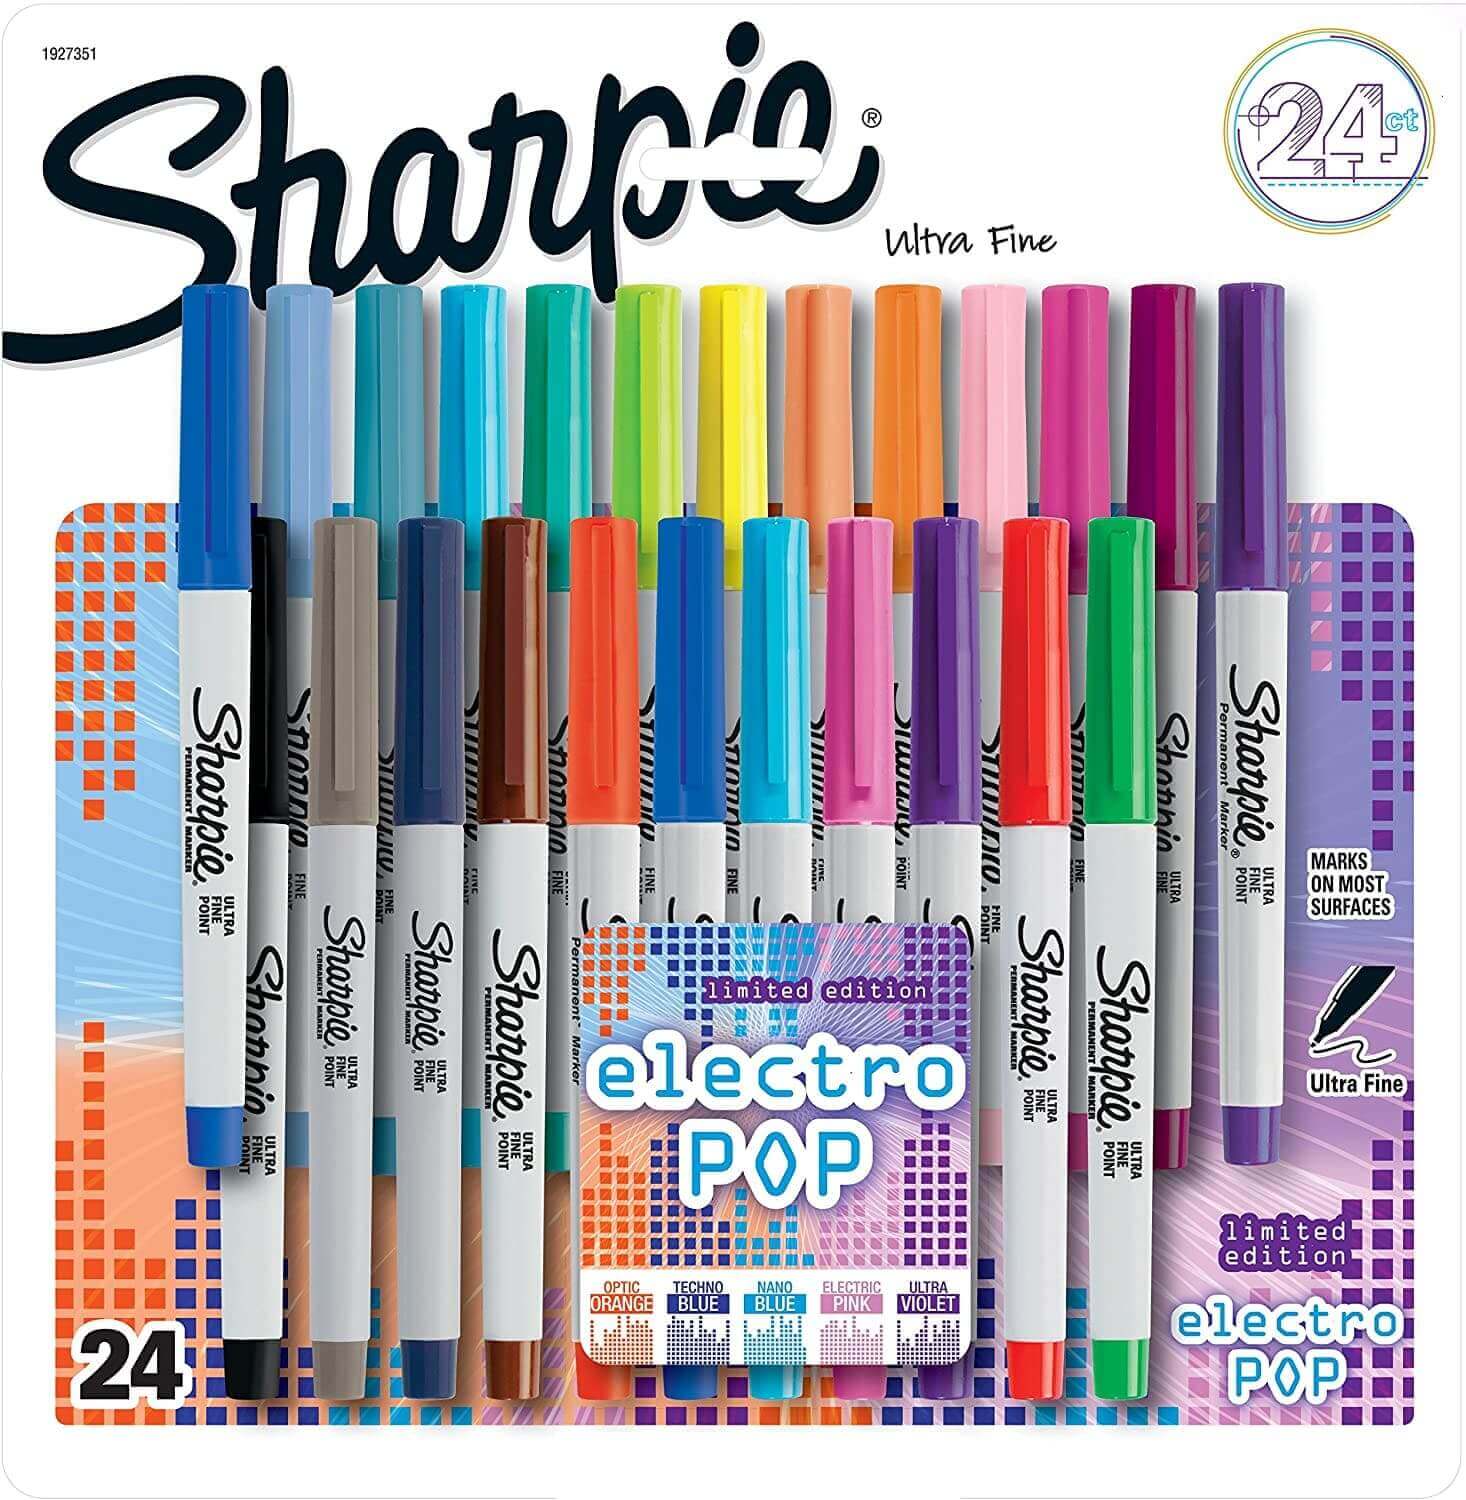 Sharpie Electro Pop pack of 24